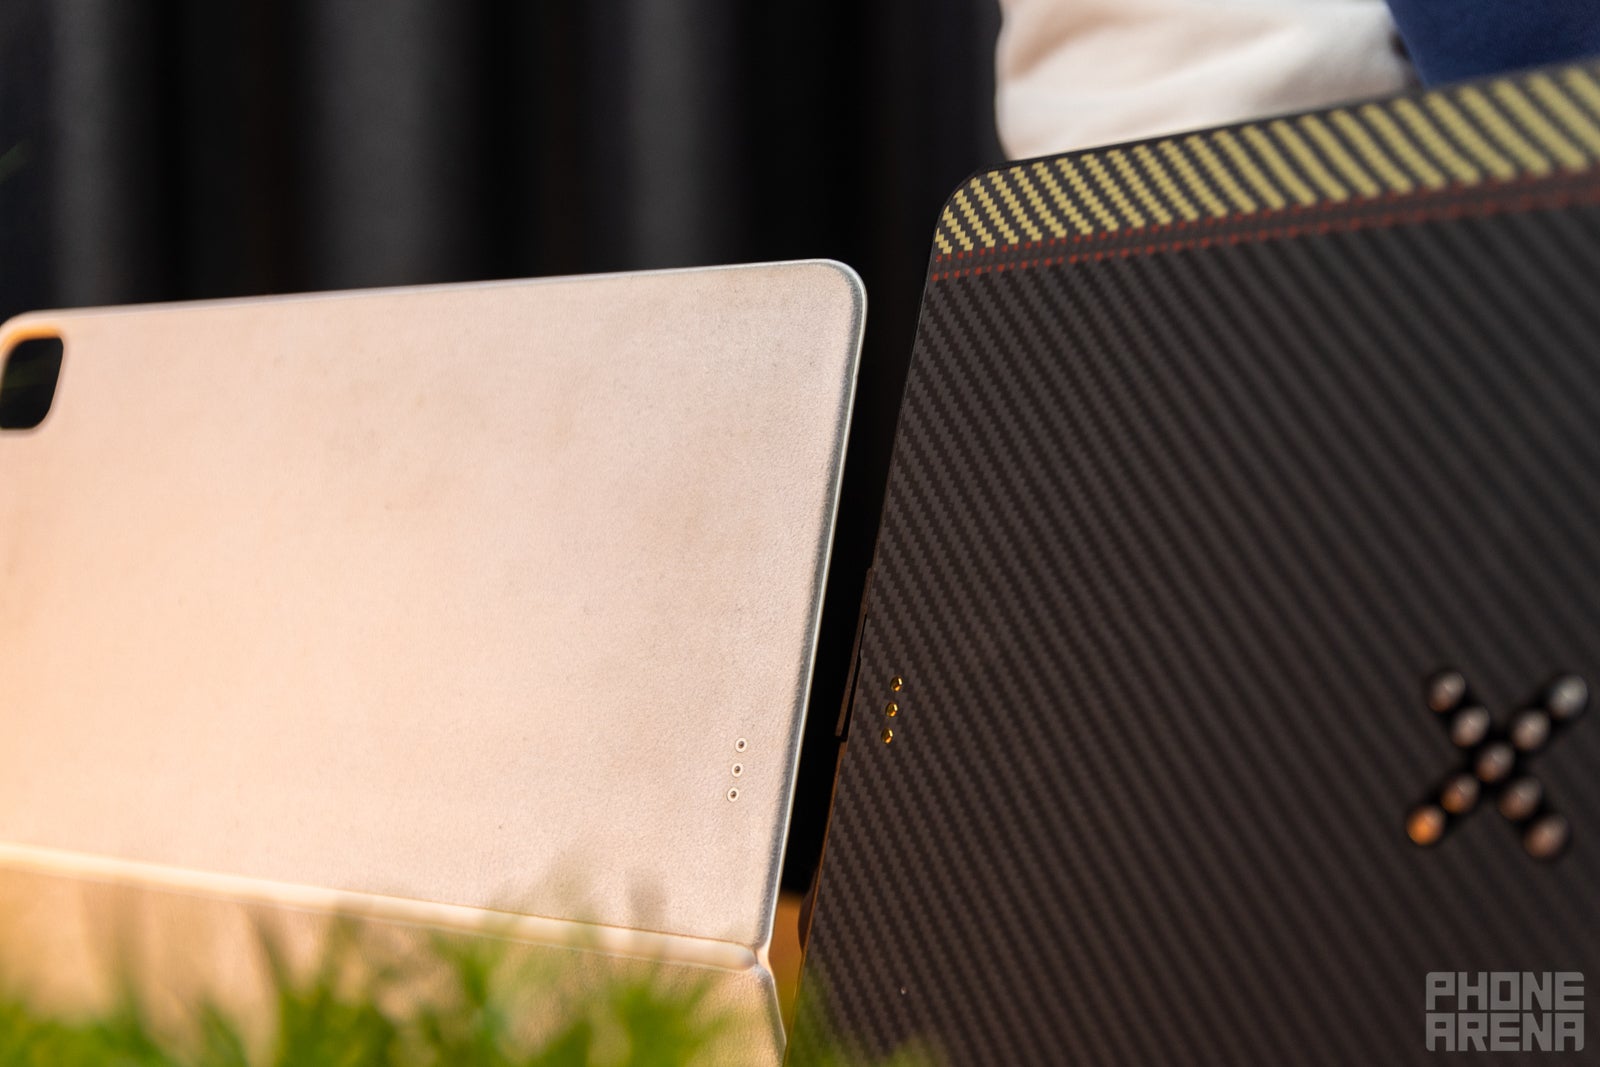 Smart Connector conductive through case - Get iPad wireless charging with Pitaka&#039;s excellent PitaFlow series